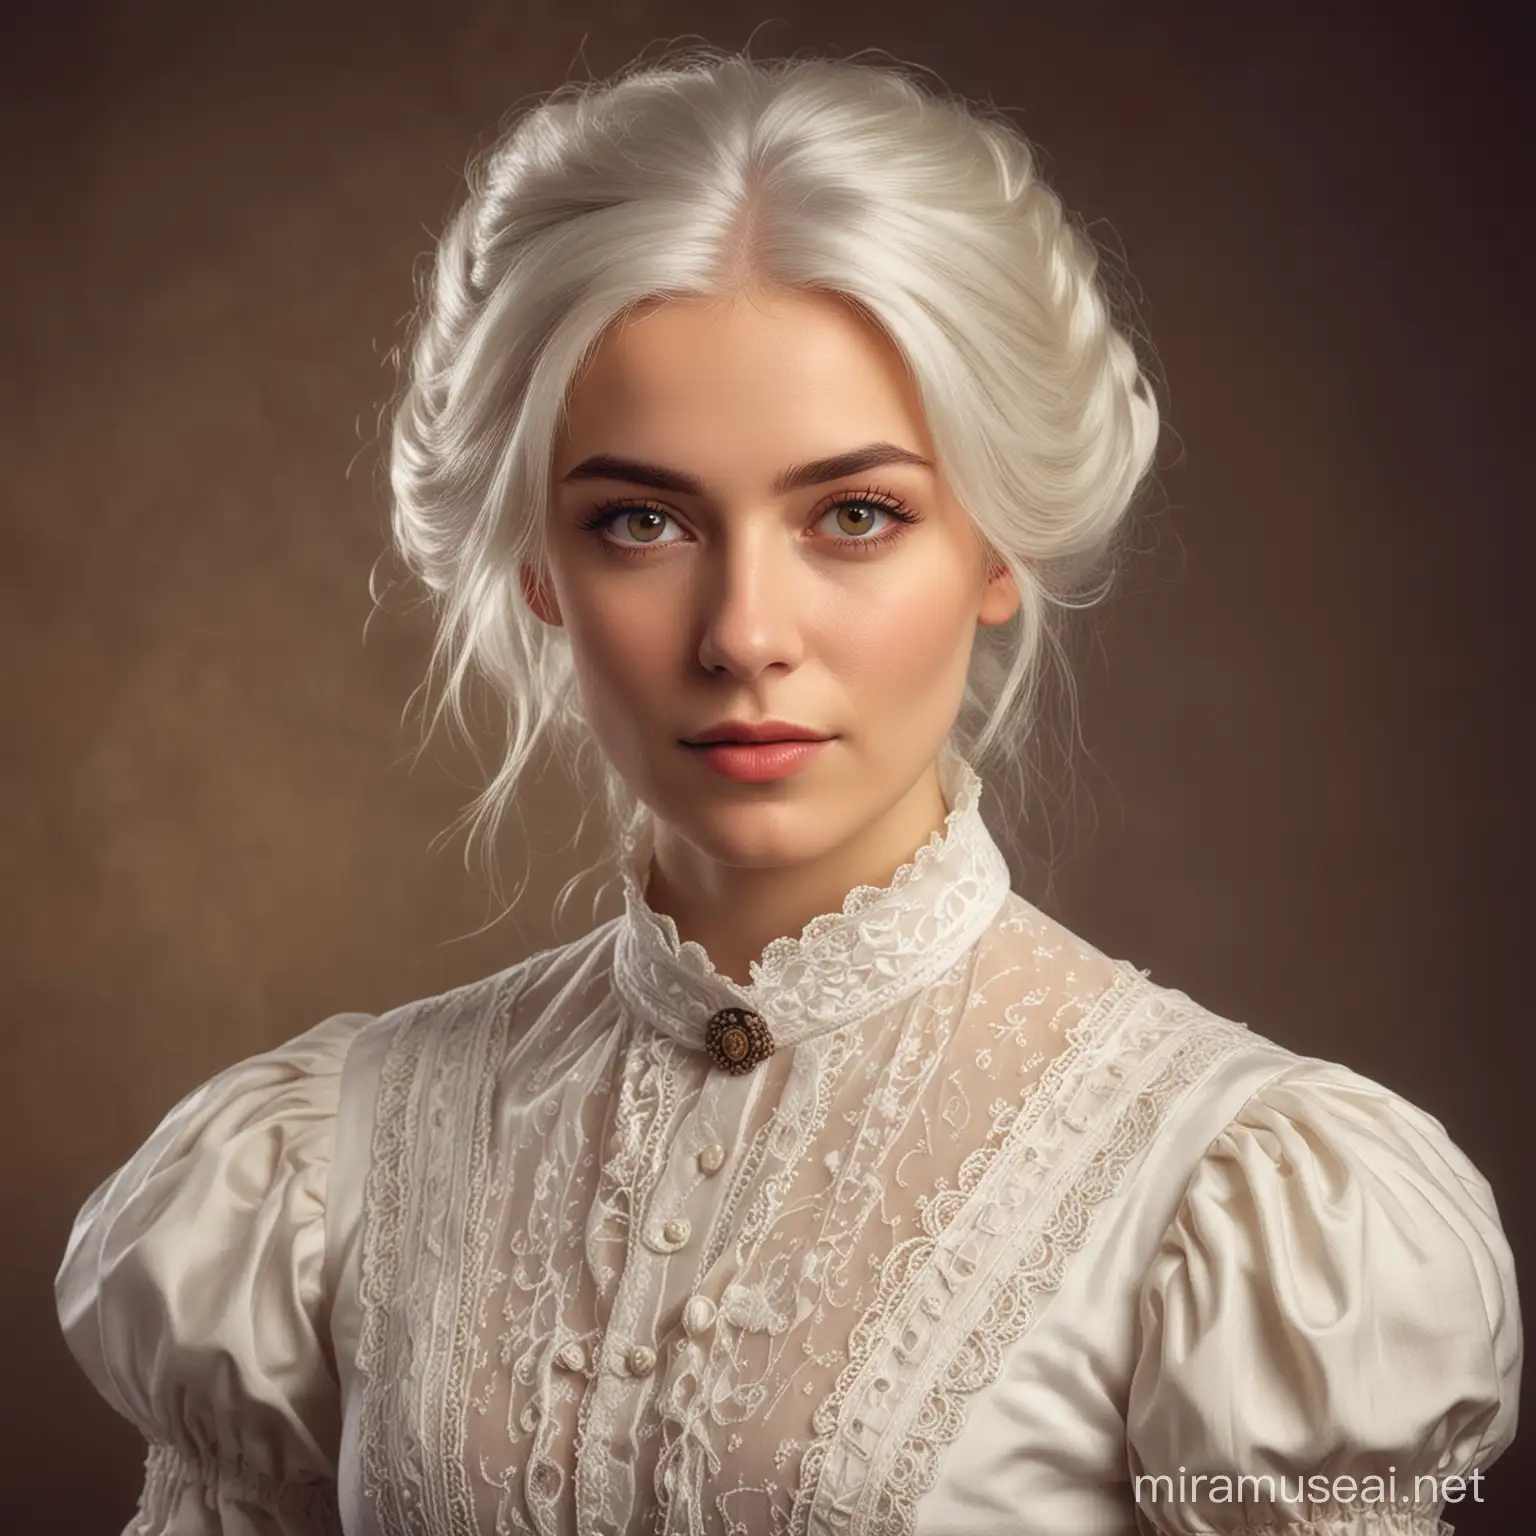 portrait, european women, white hair, almond color eyes, classic style, victorian dress, with a warm light and high contrast with background.